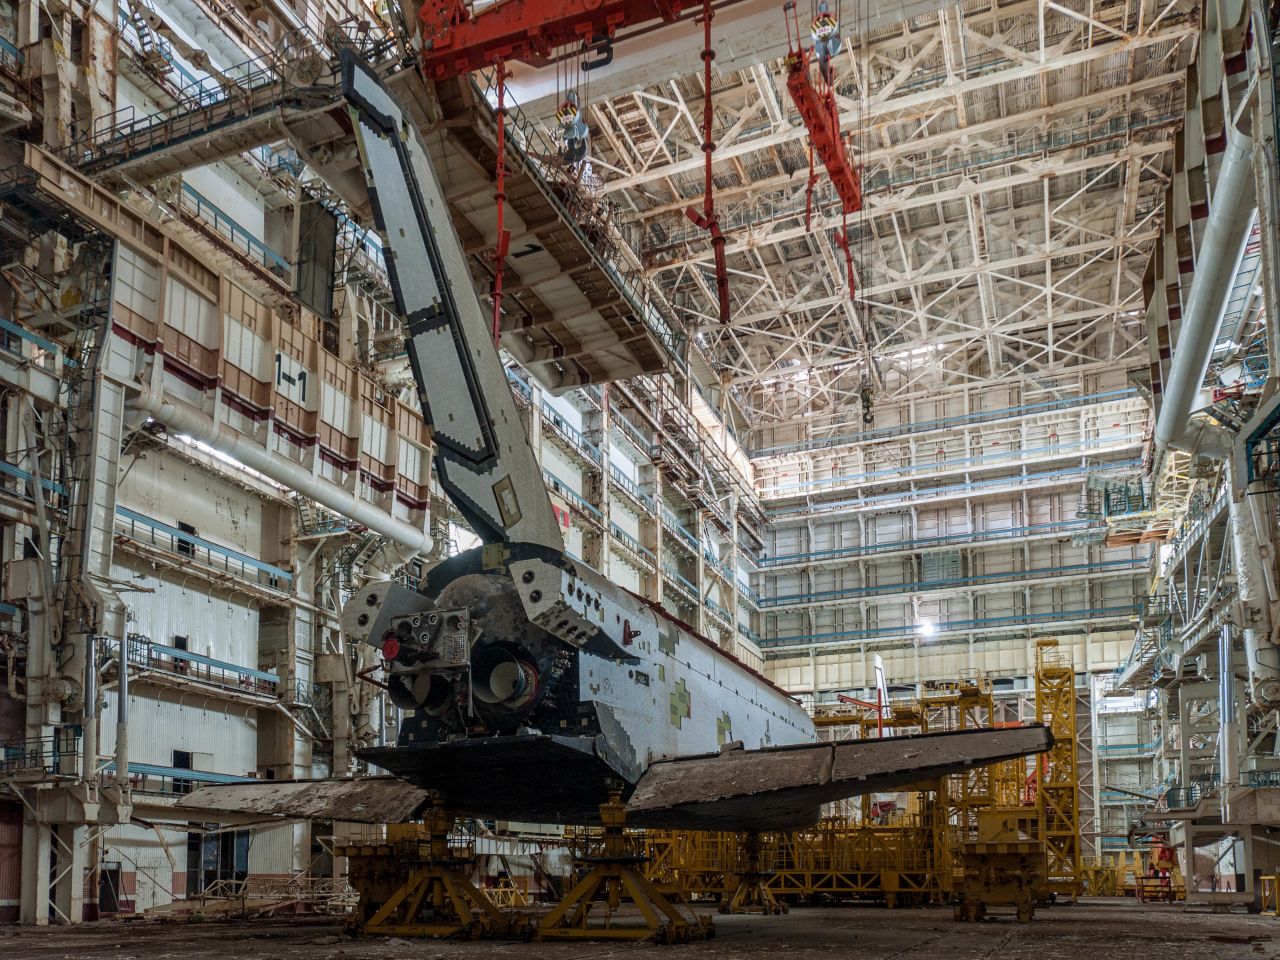 That's not to say the entire Baikonur Cosmodrome site is in such a decaying state. In fact, this hangar is just a few kilometers from the launchpad where cosmonaut Yuri Gagrin became the first person to fly into space in 1961 -- a launchpad that is still in use today. 